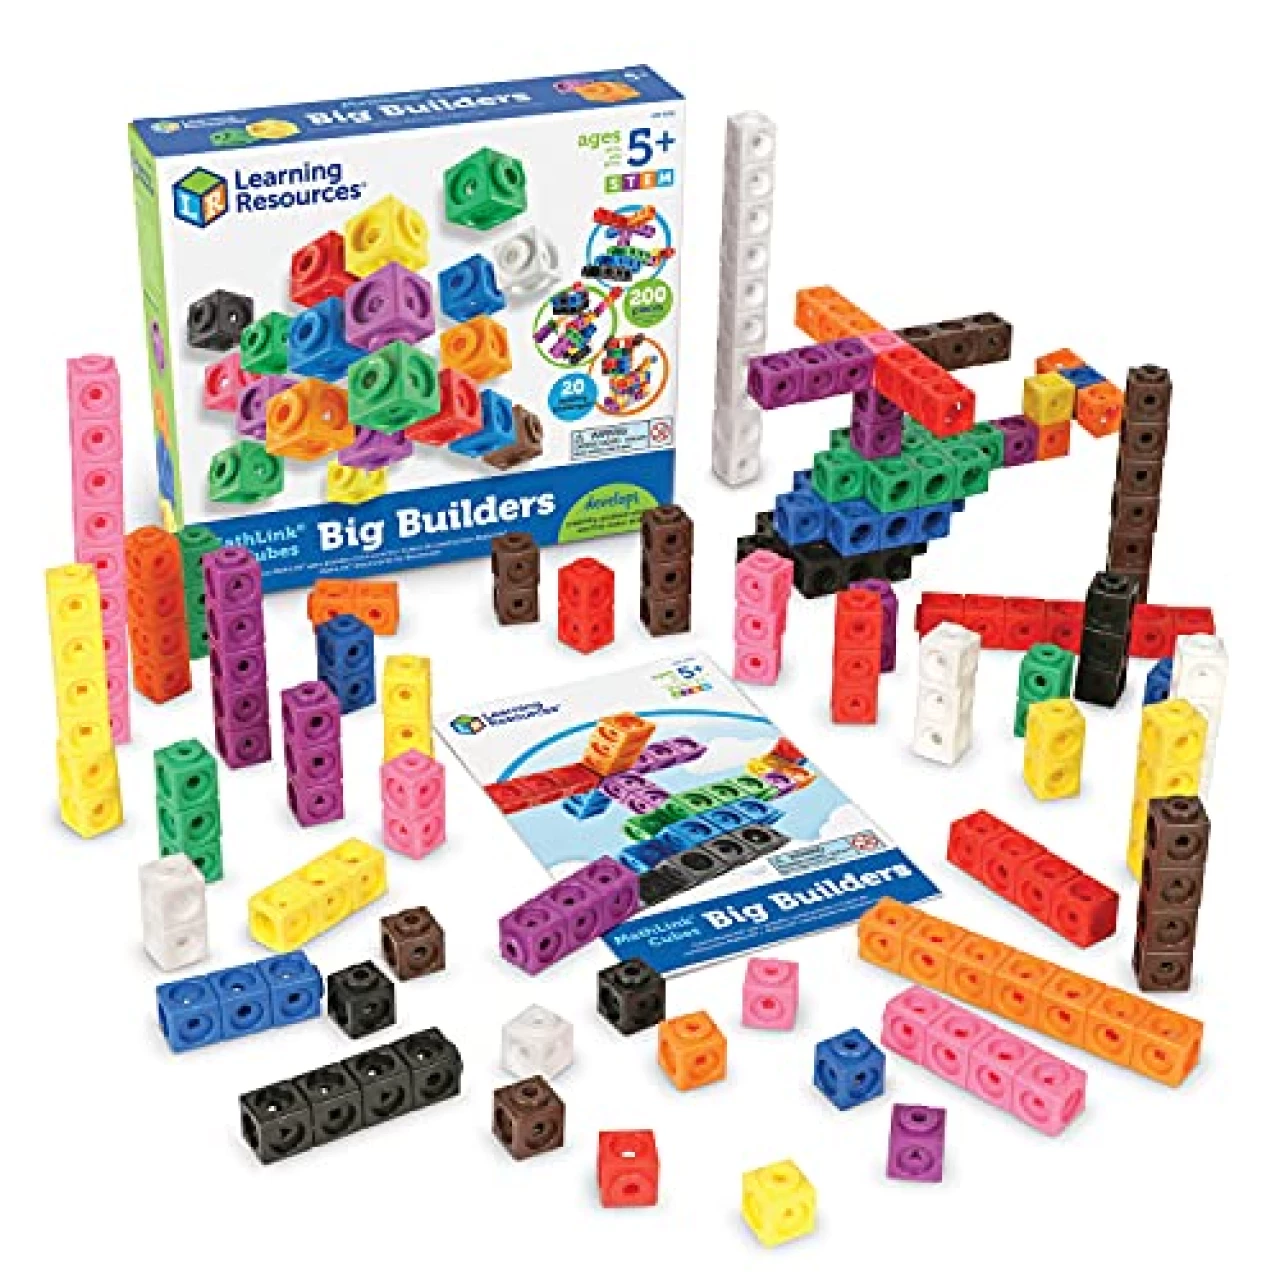 Learning Resources MathLink Cubes Big Builders - Set of 200 Cubes